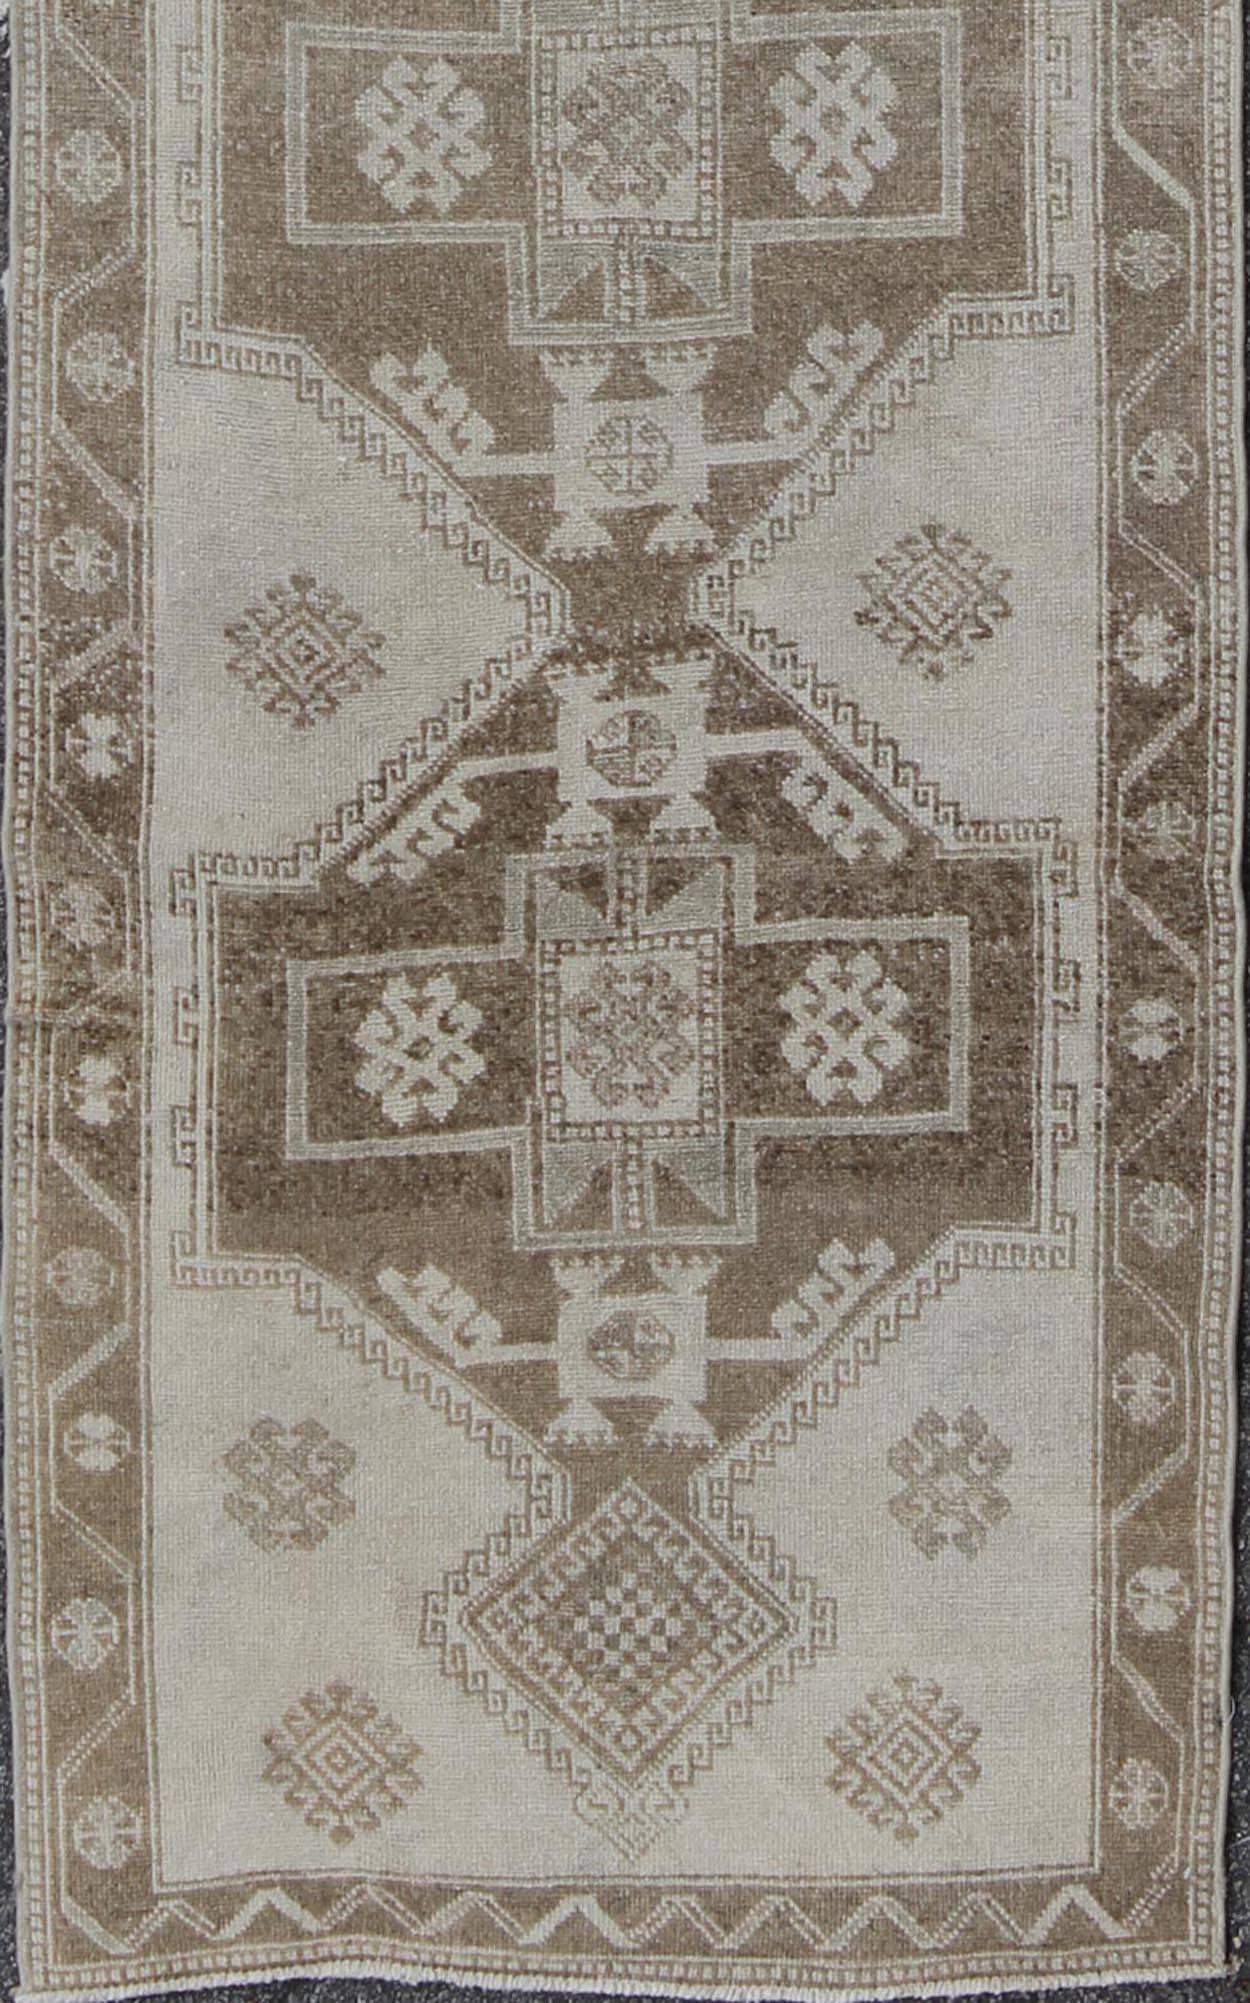 Turkish Oushak gallery runner with four tribal medallions in light gray / brown, rug alk-3649, country of origin / type: Turkey / Oushak, circa mid-20th century

This vintage Turkish Oushak gallery rug (circa mid-20th century) features a unique